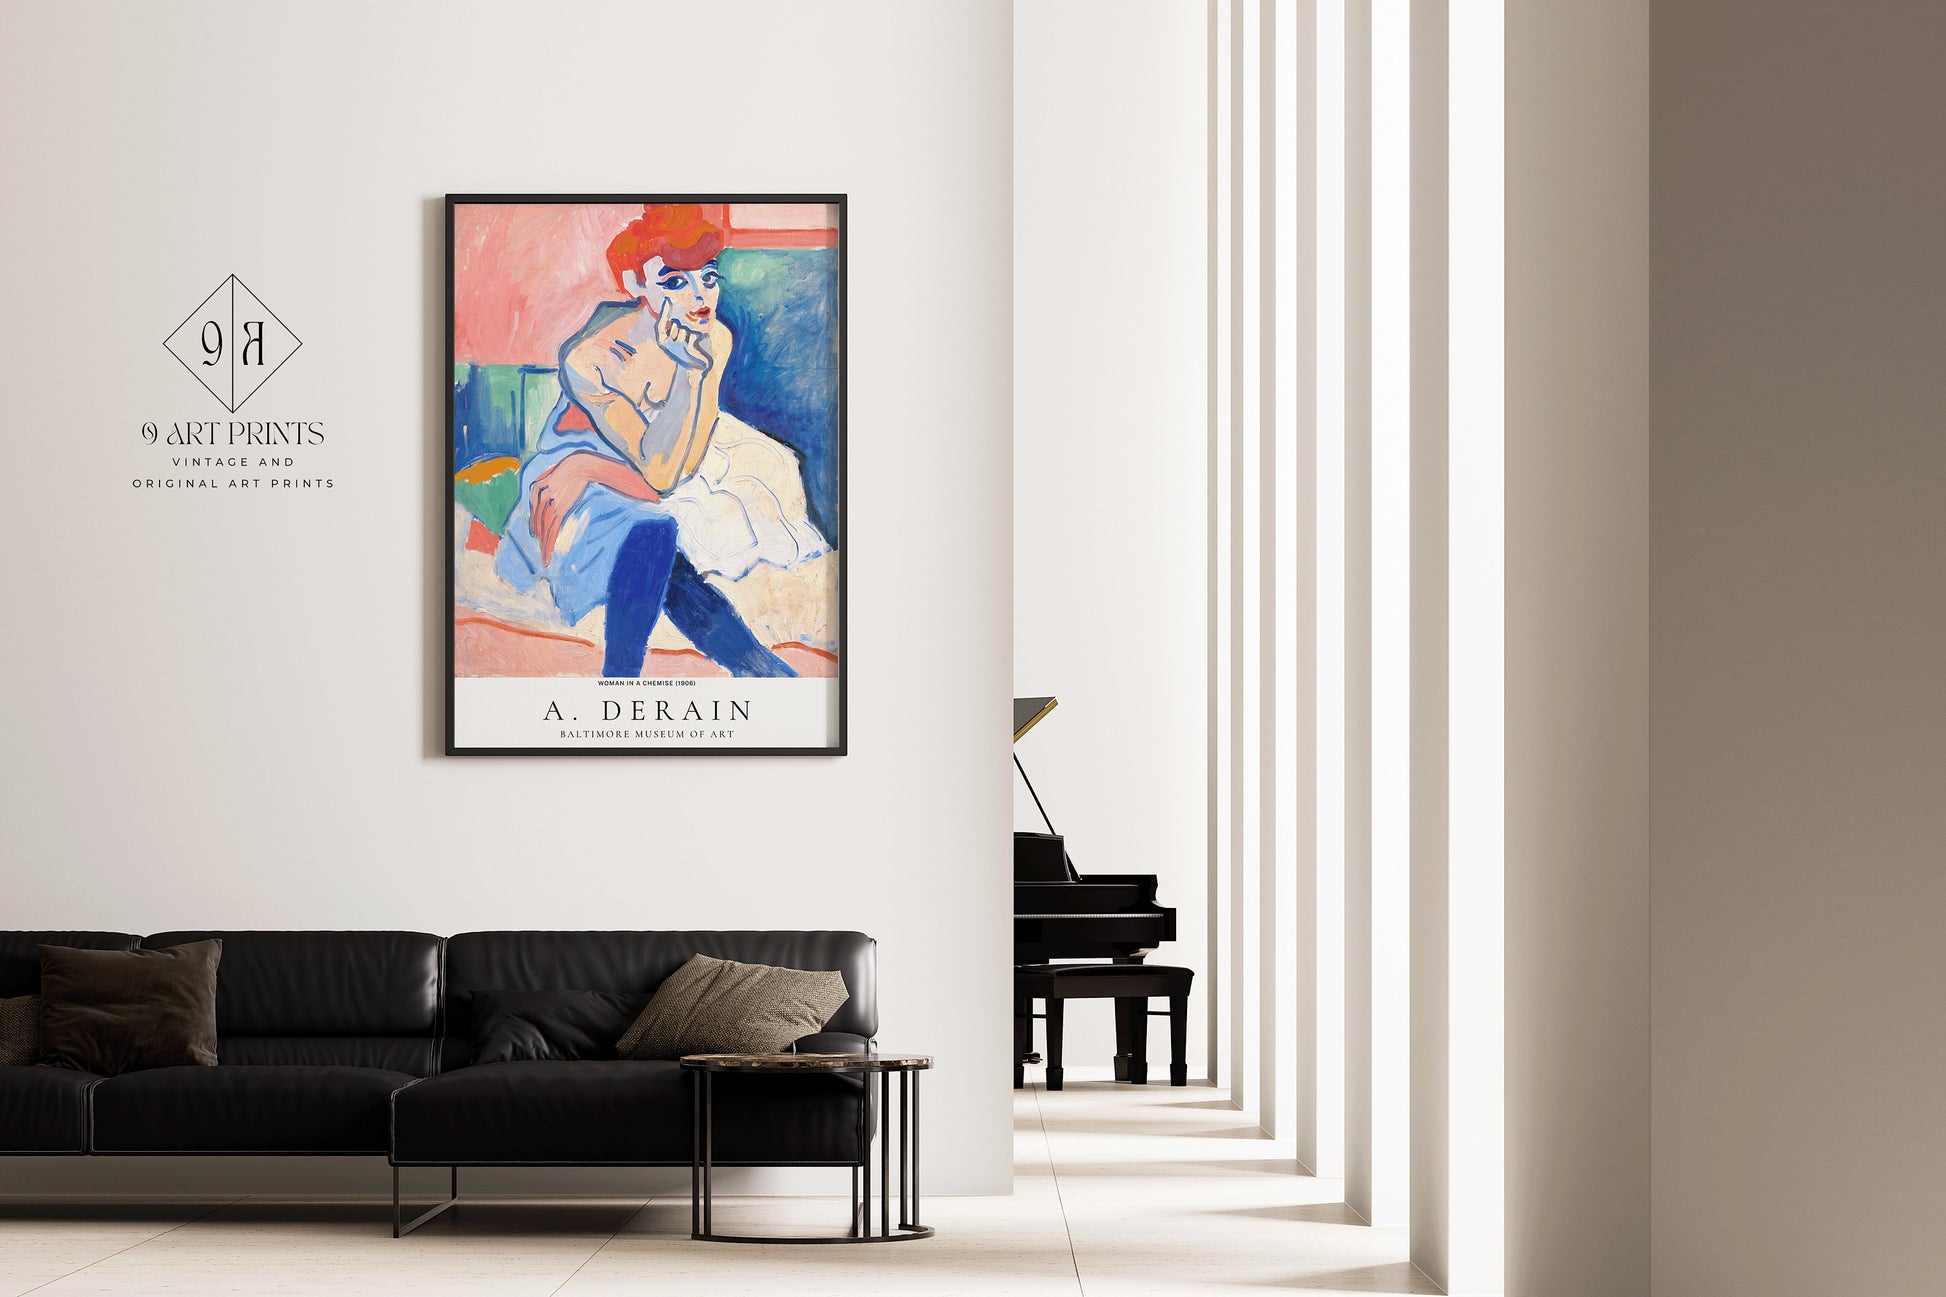 Framed Andre Derain Woman in a Chemise Iconic Famous Painting Art Print Exhibition Museum Poster Ready to Hang Home Office Decor Gift Idea